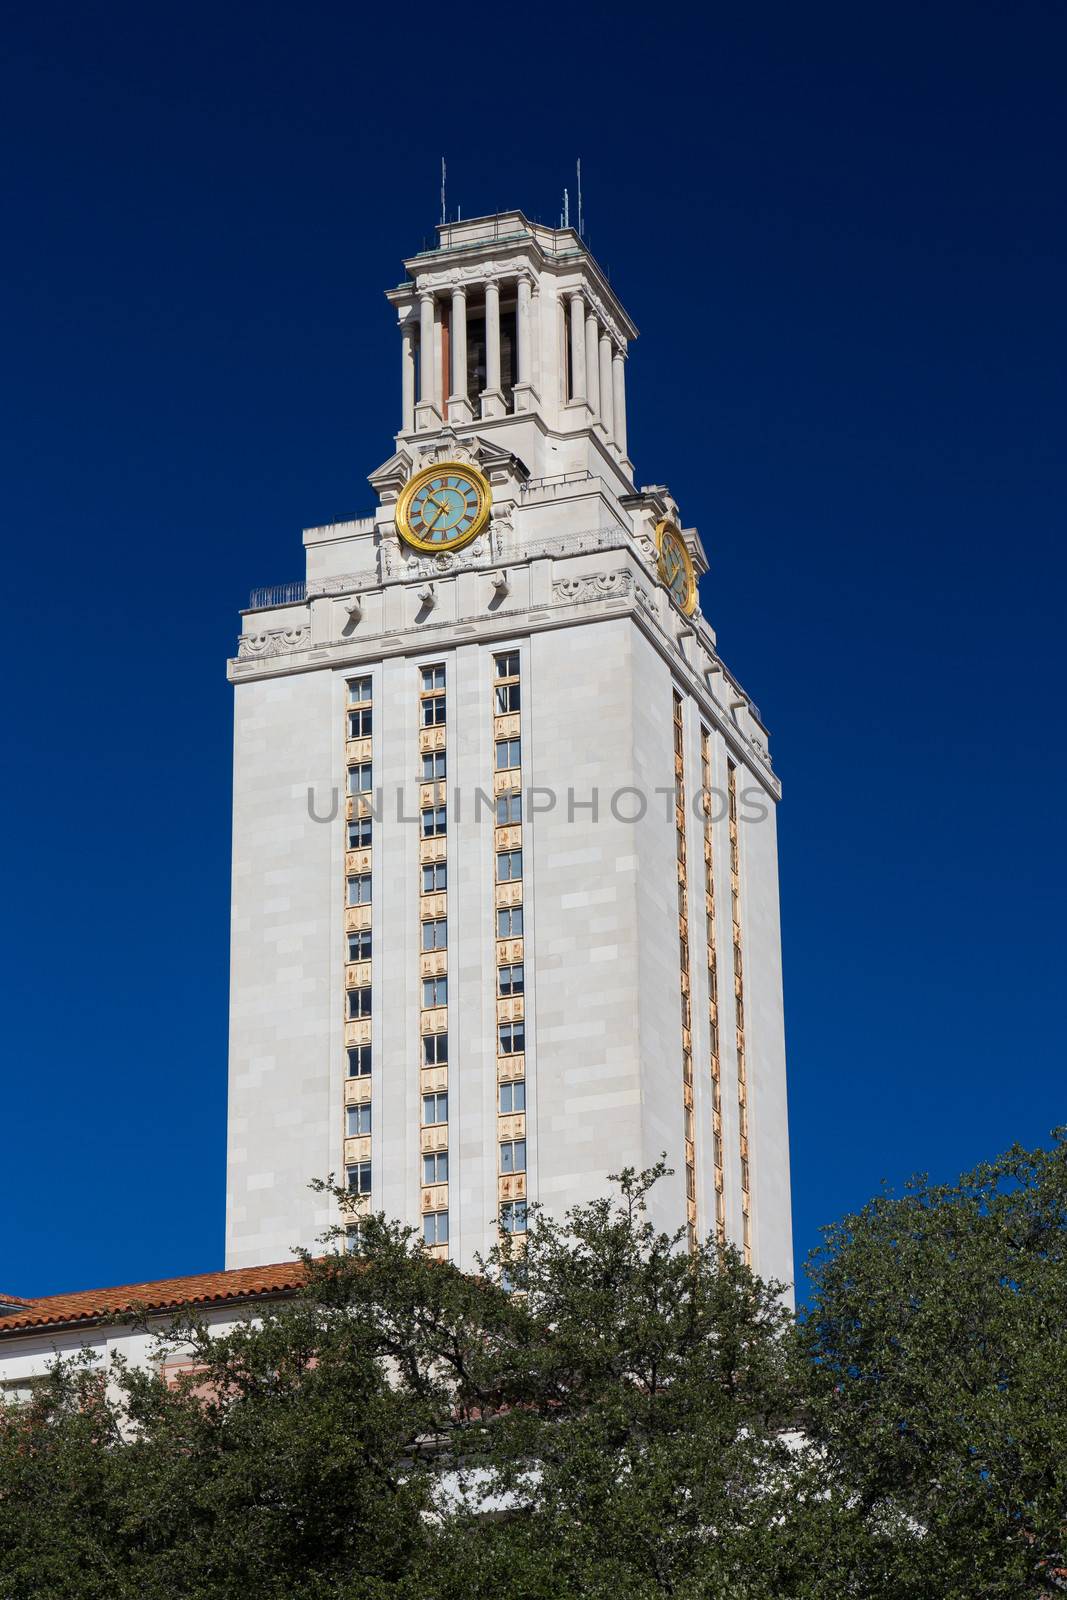 AUSTIN,TX/USA - NOVEMBER 14:  Main Building and Clock Tower on campus of the University of Texas, a state research university and the flagship institution of the The University of Texas System. November 14, 2013.